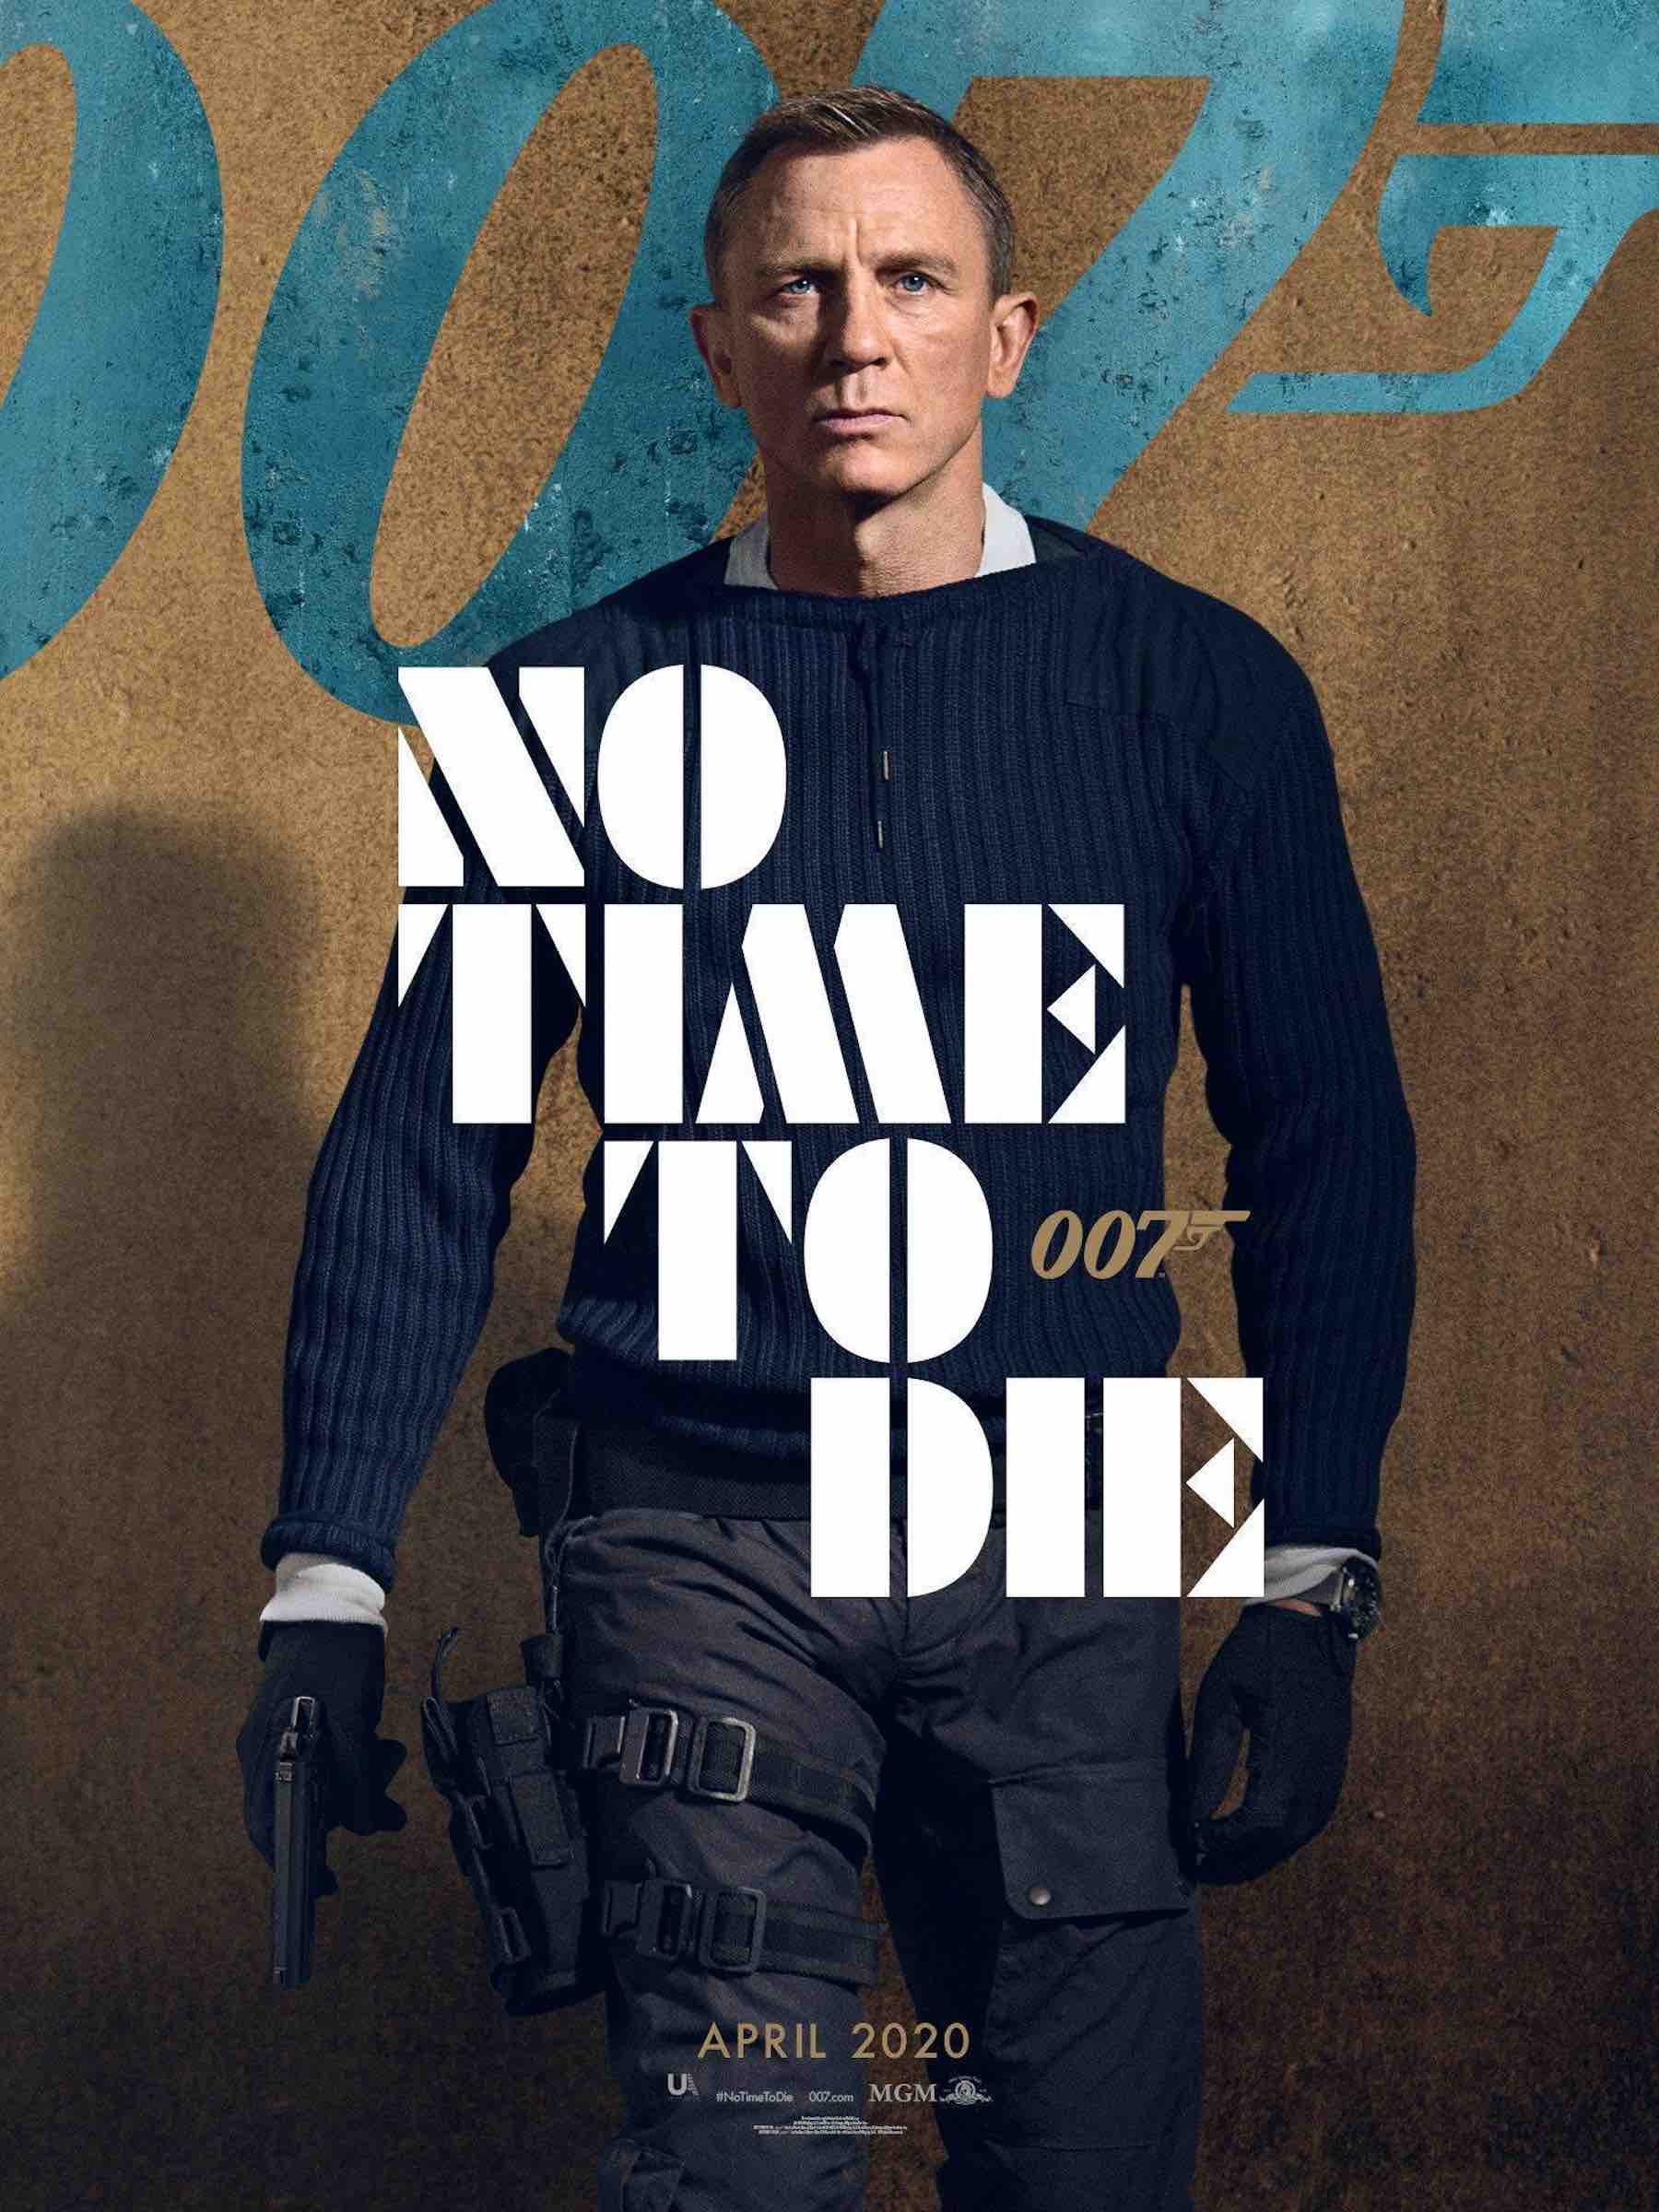 With 'No Time to Die' becoming Daniel Craig's final farewell as James Bond, here's everything you need to know about the upcoming film.